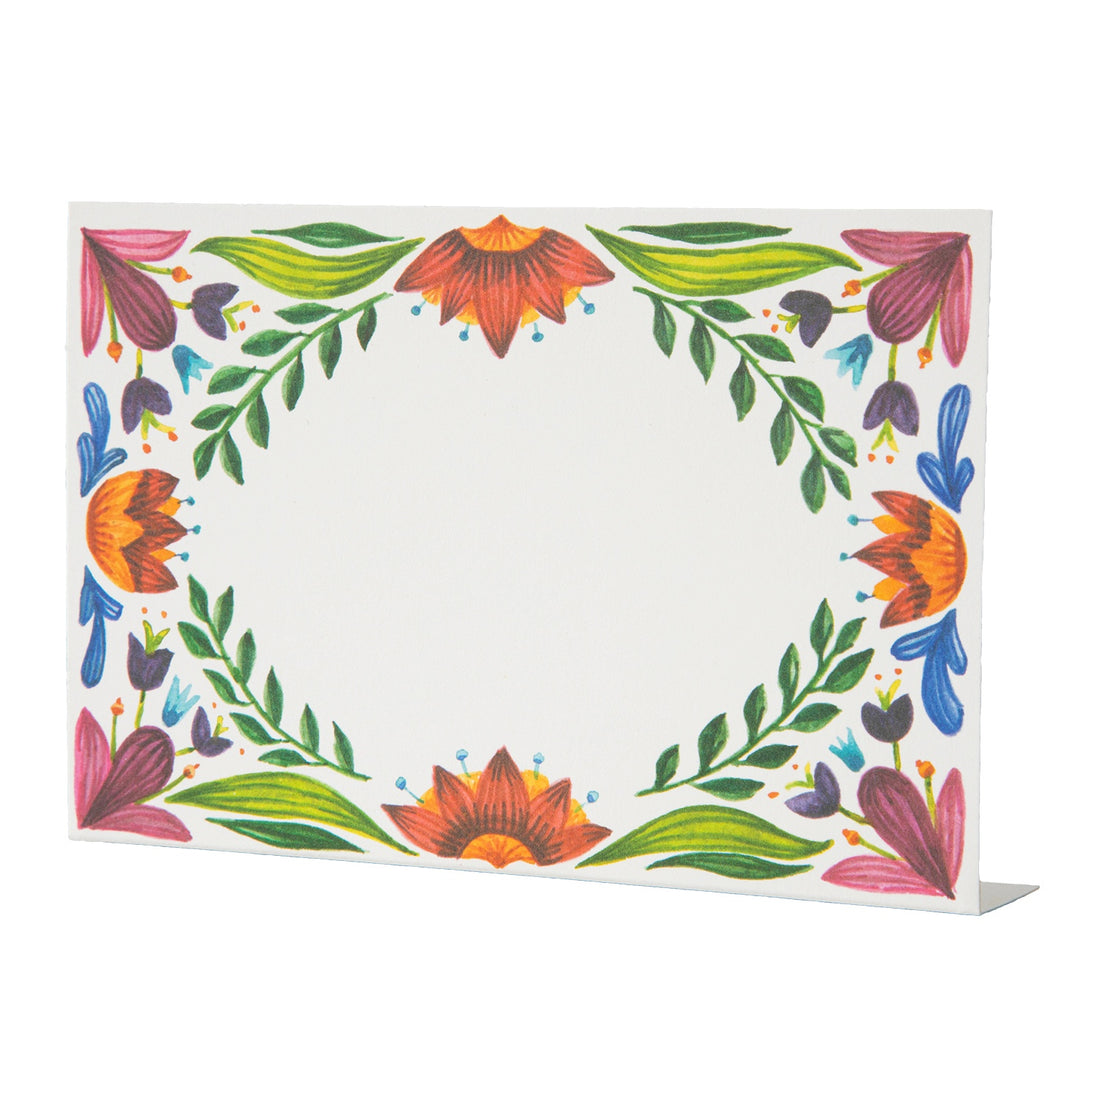 A rectangular, freestanding Fiesta Floral place card featuring colorful Mexican-inspired floral design on a white background by Hester &amp; Cook.